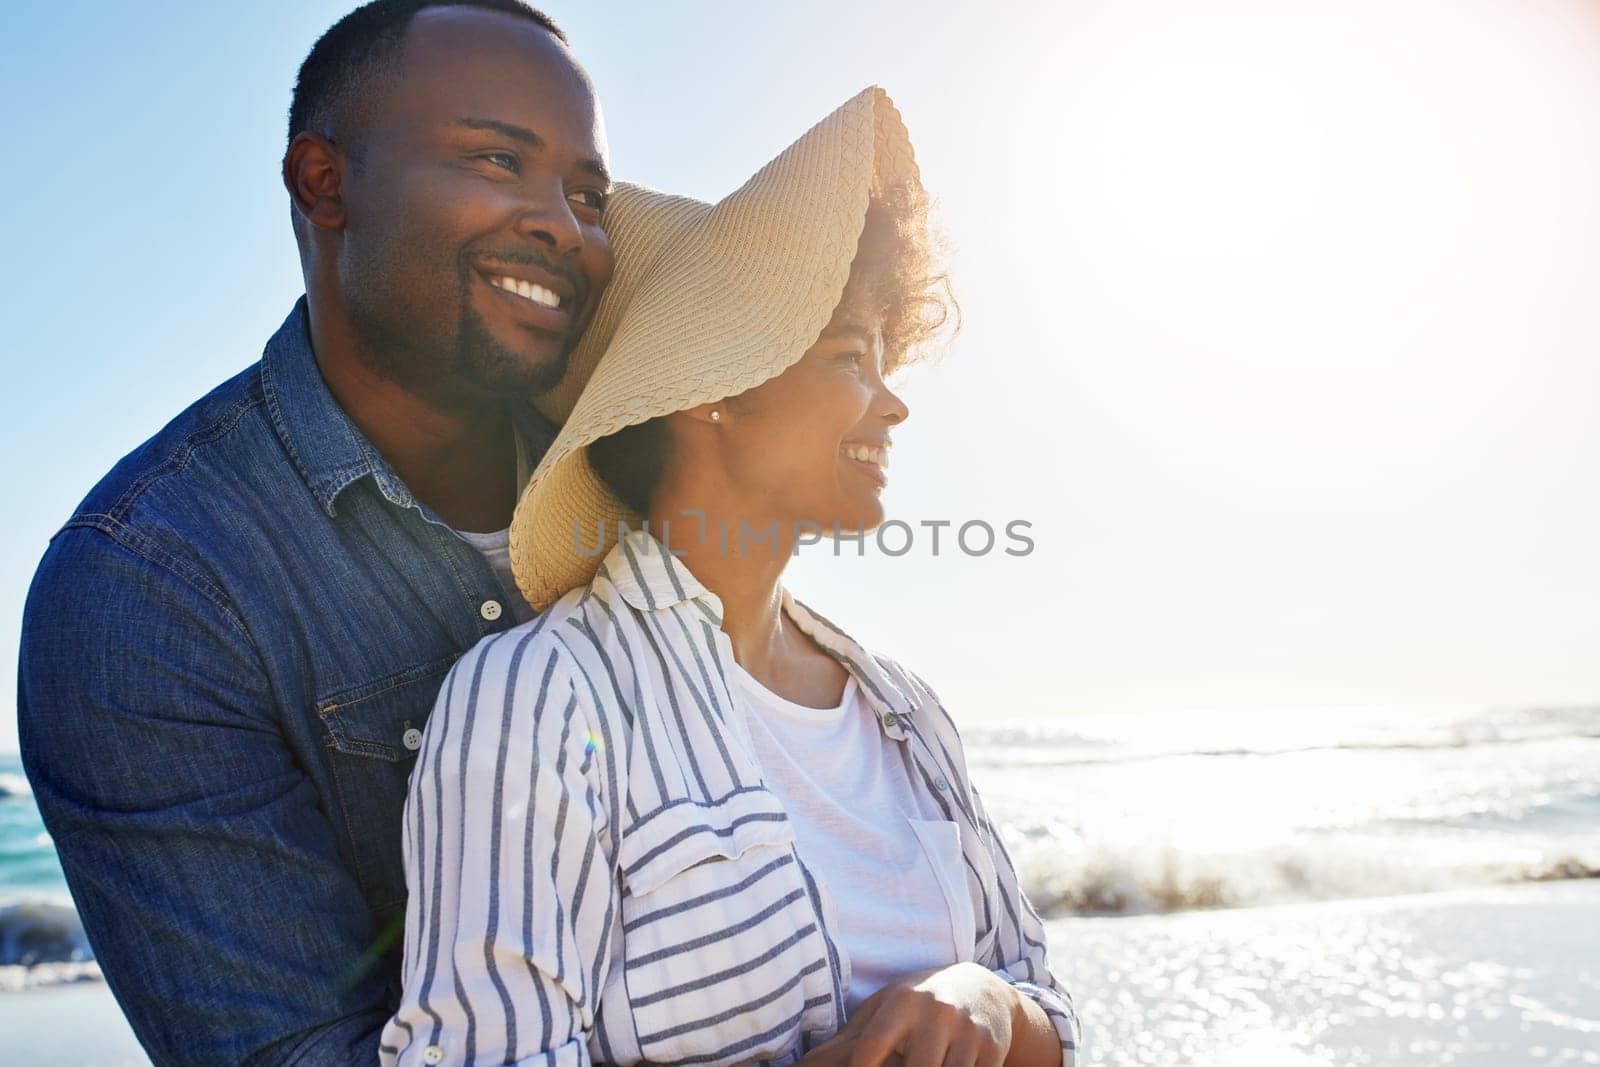 The perfect spot for some romance and relaxation. a happy young couple enjoying a day at the beach together